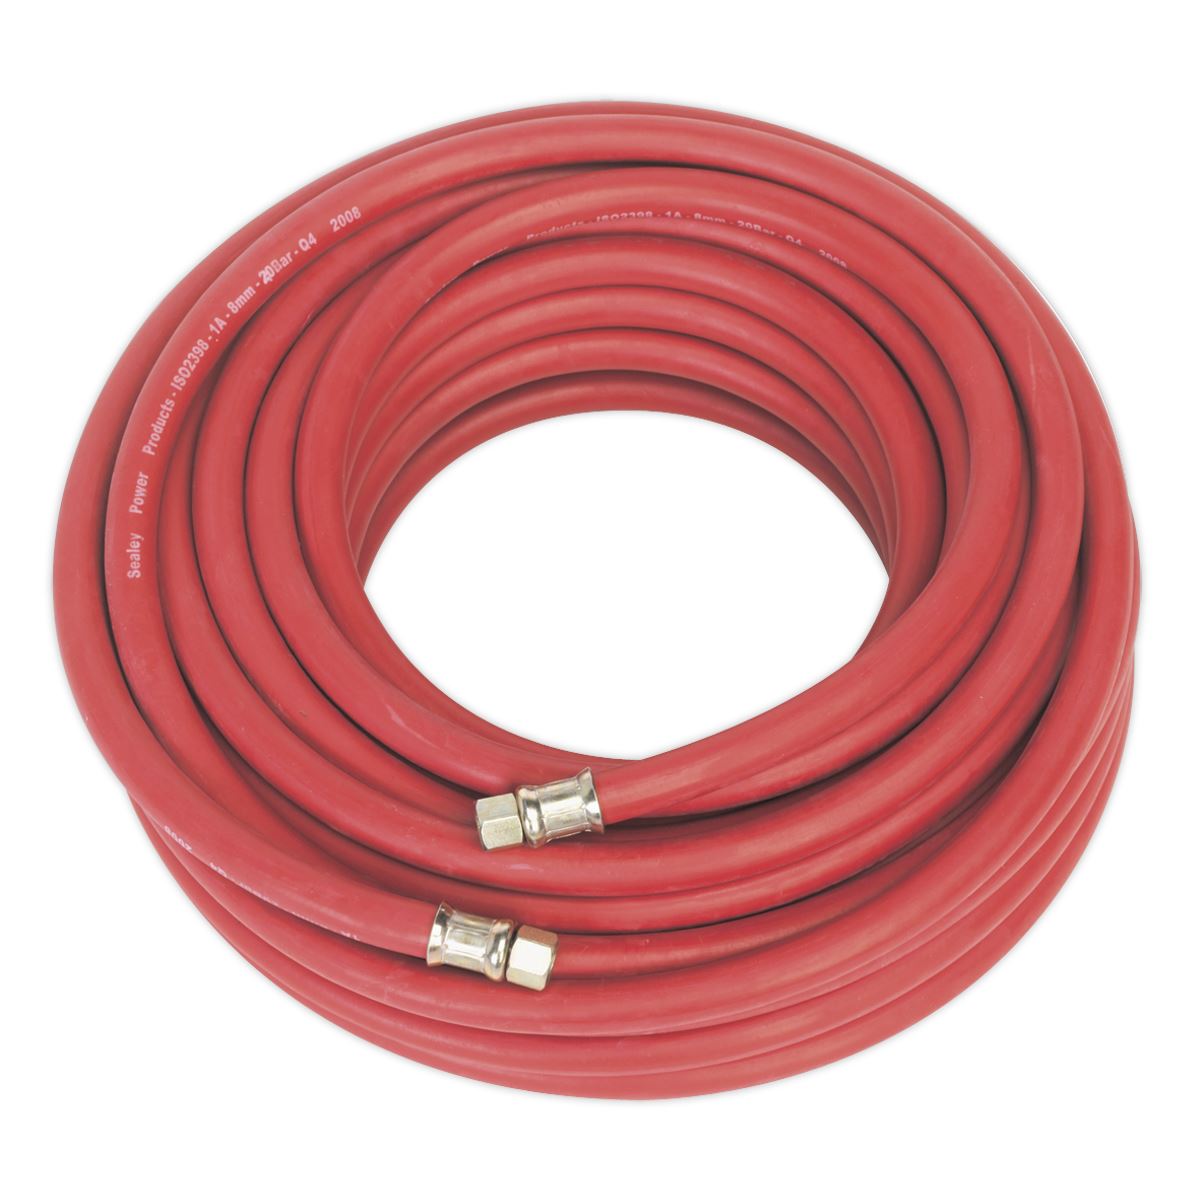 Sealey Air Hose 20m x Ø8mm with 1/4"BSP Unions